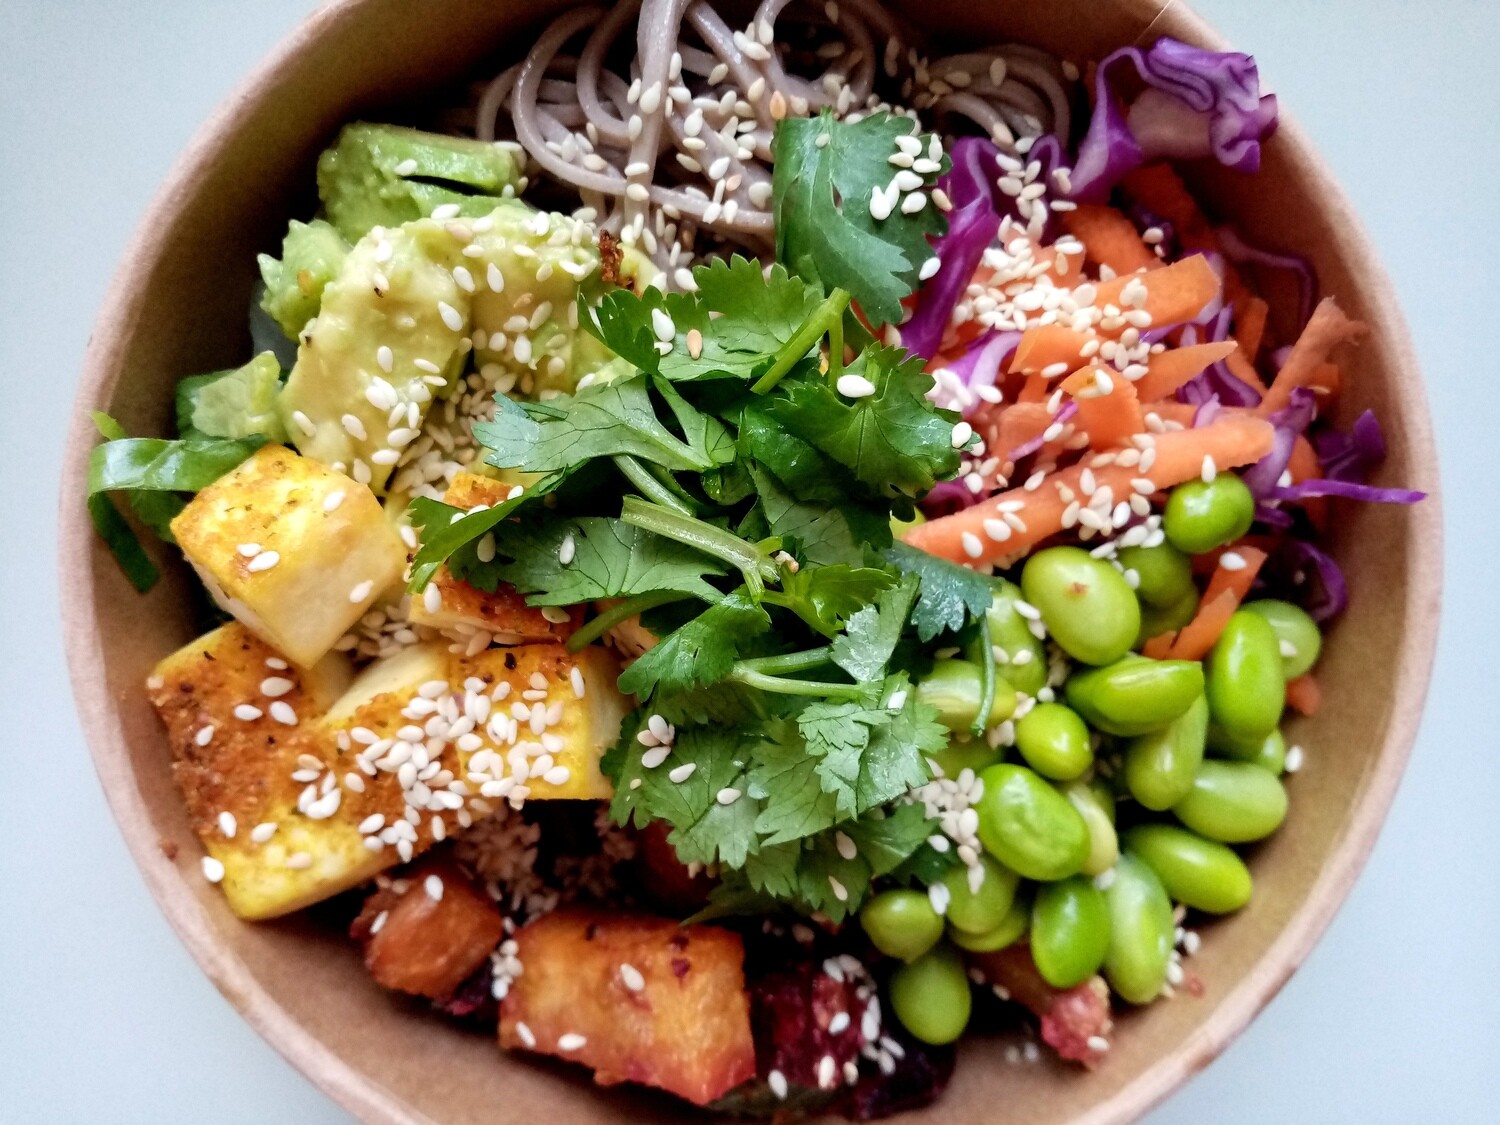 CHI BOWL: Soba noodles, red cabbage slaw, miso and tahini roasted vegetables, steamed edamame, cos lettuce, avocado, baked tofu, sesame seeds, coriander. Your choice extras and vinnaigrette. DF